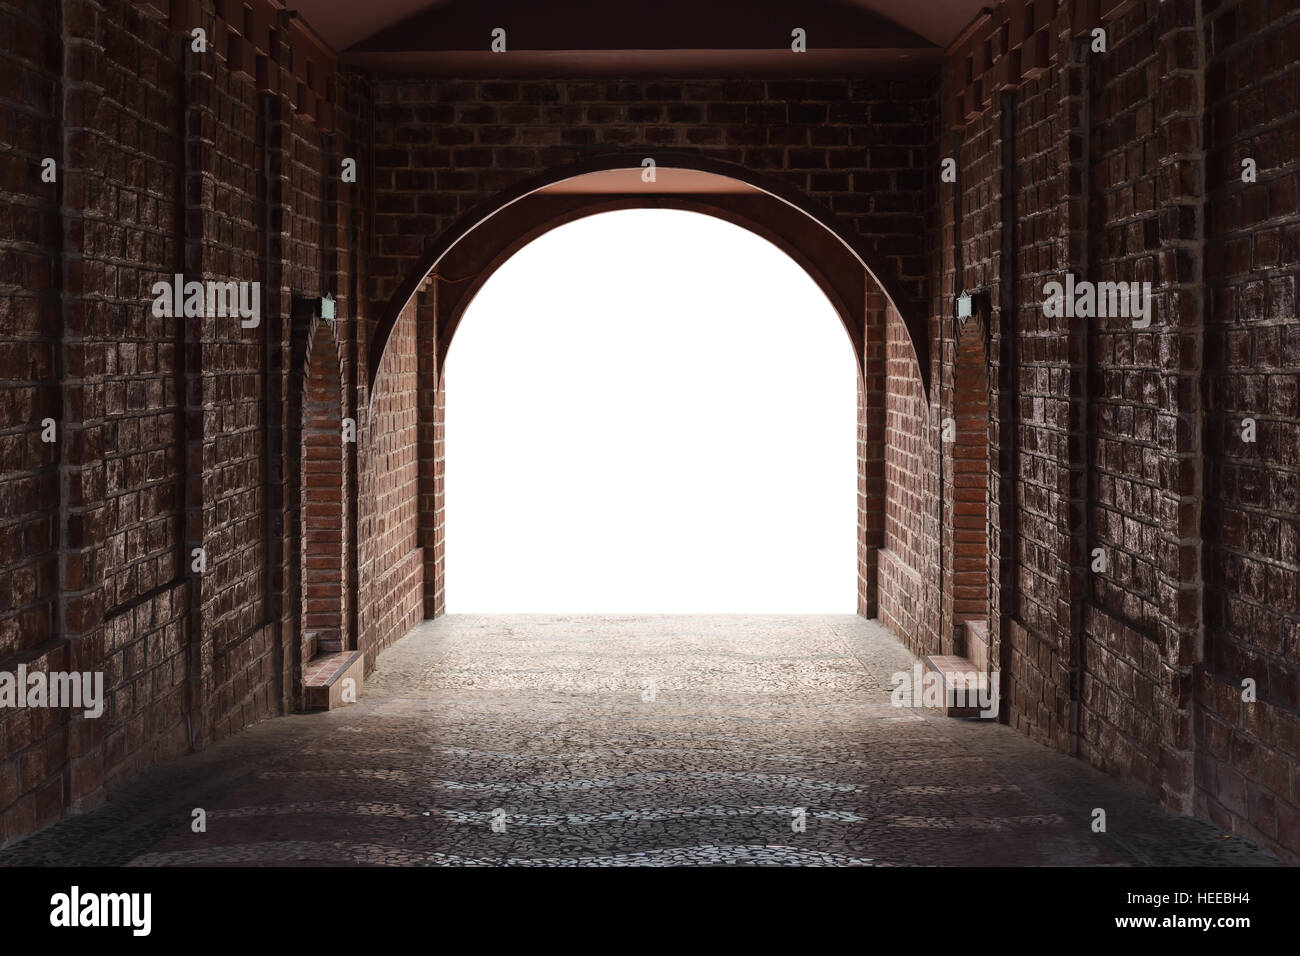 Walkway tunnel made by red brick and middle white isolated space for text or design Stock Photo